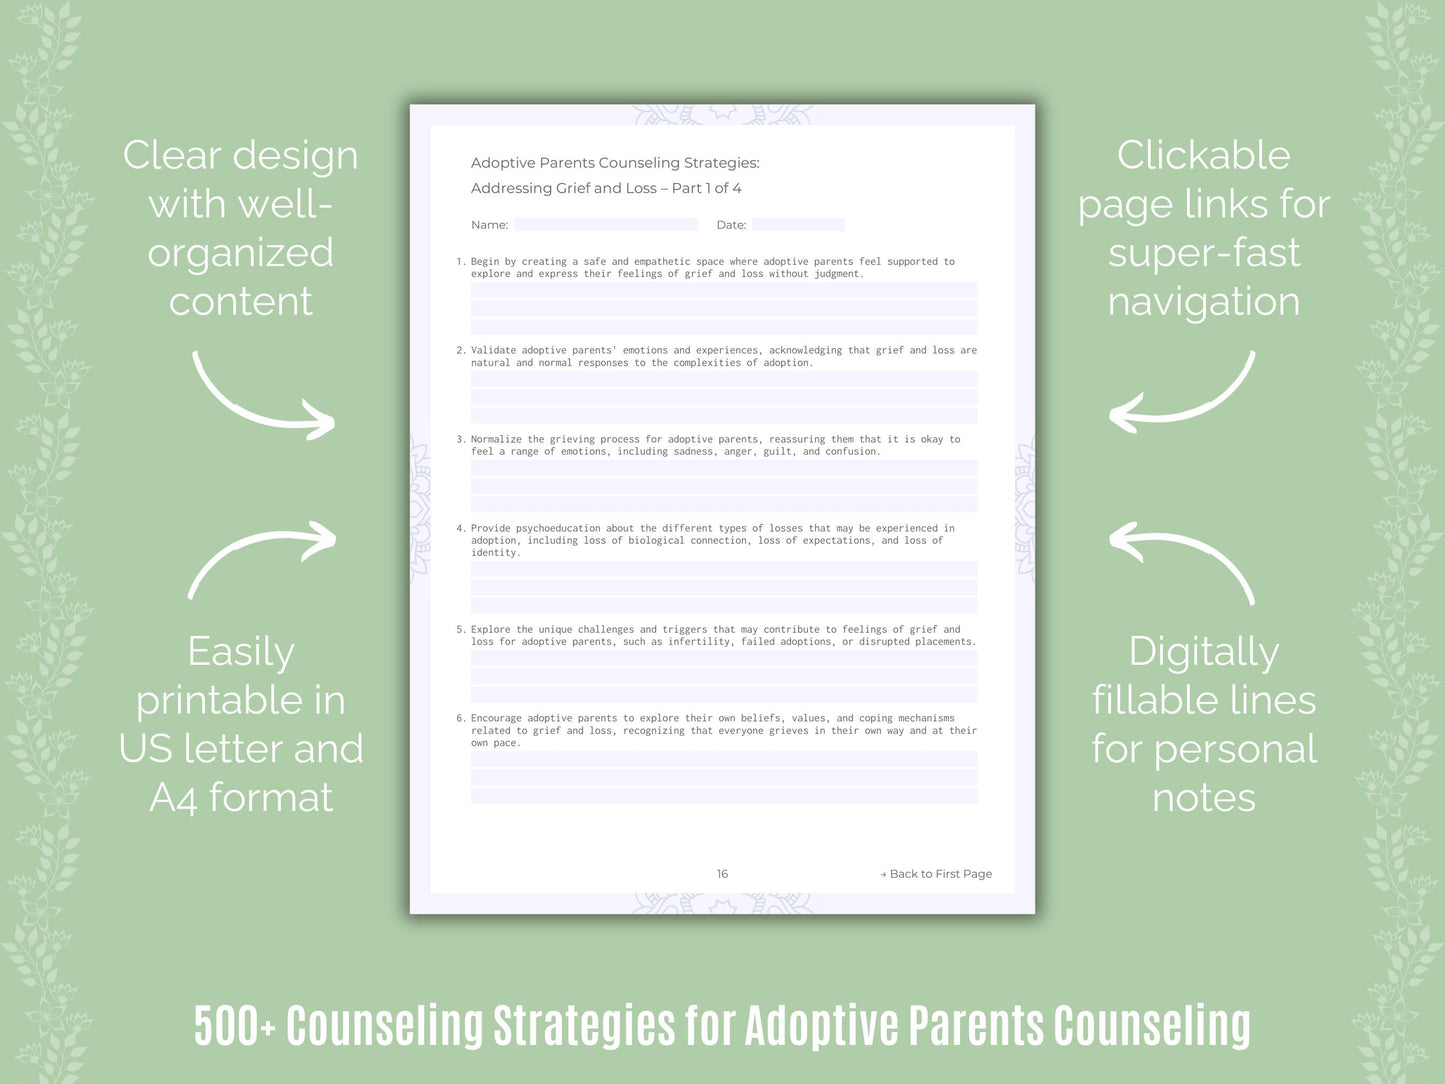 Adoptive Parents Counseling Resource